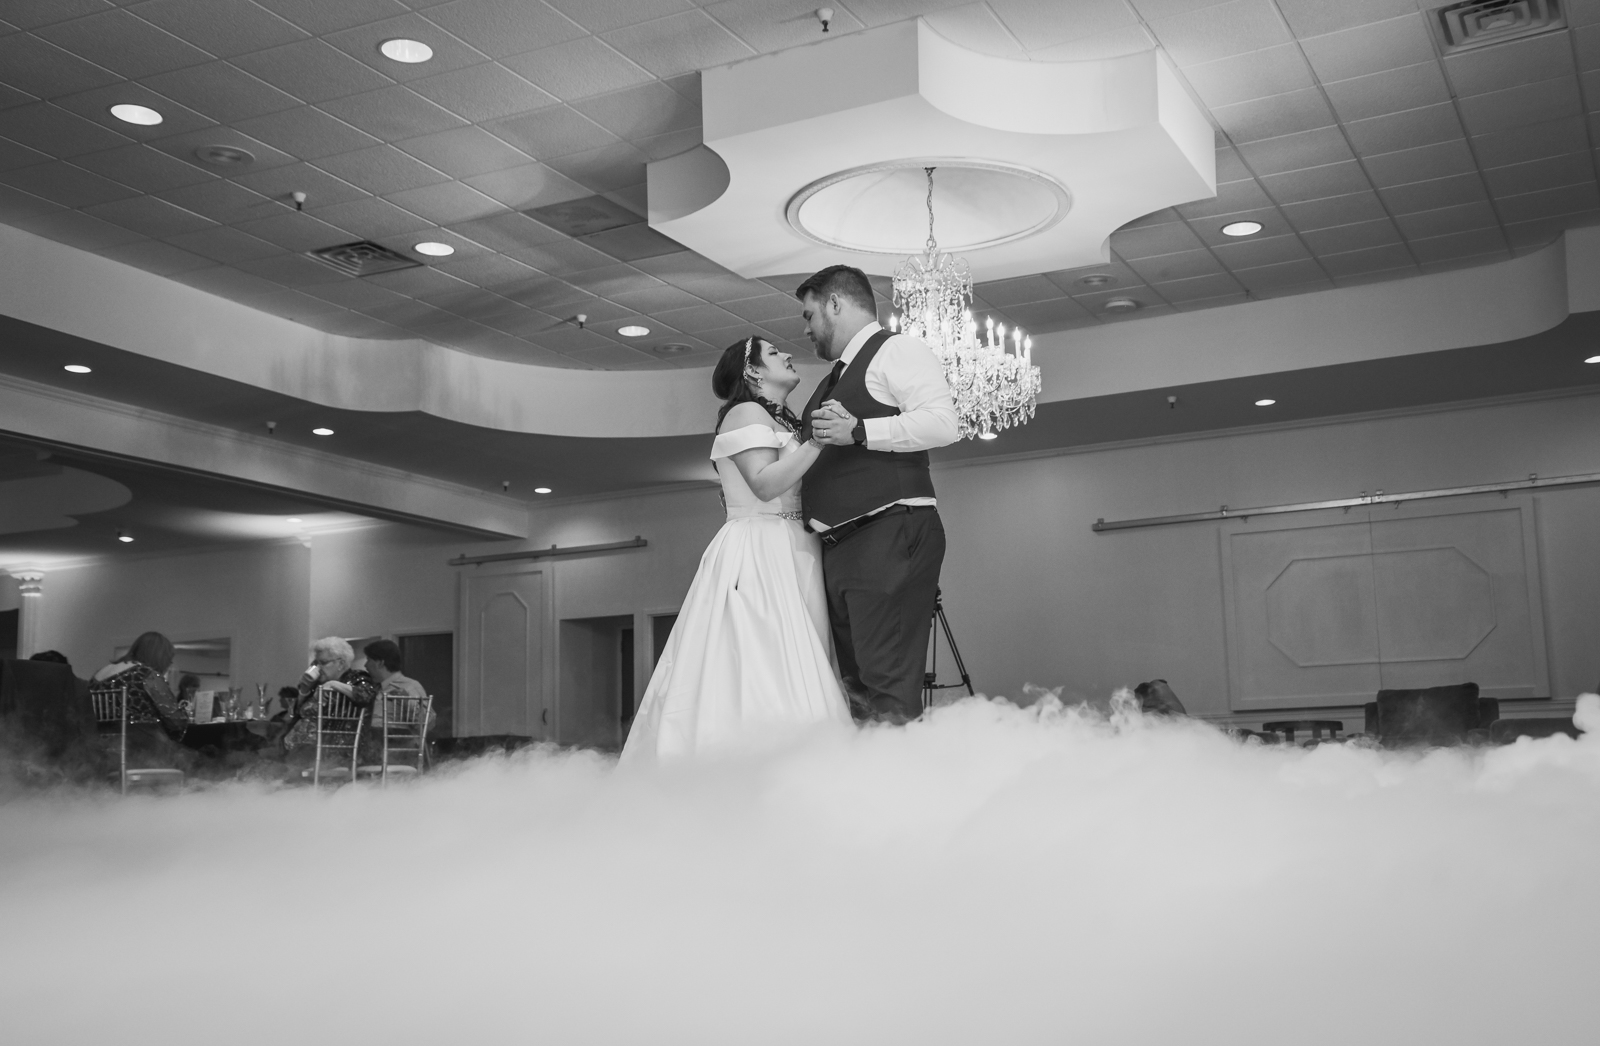 Megan + Curtis at the Tremont City Ballroom in Tremont Ohio